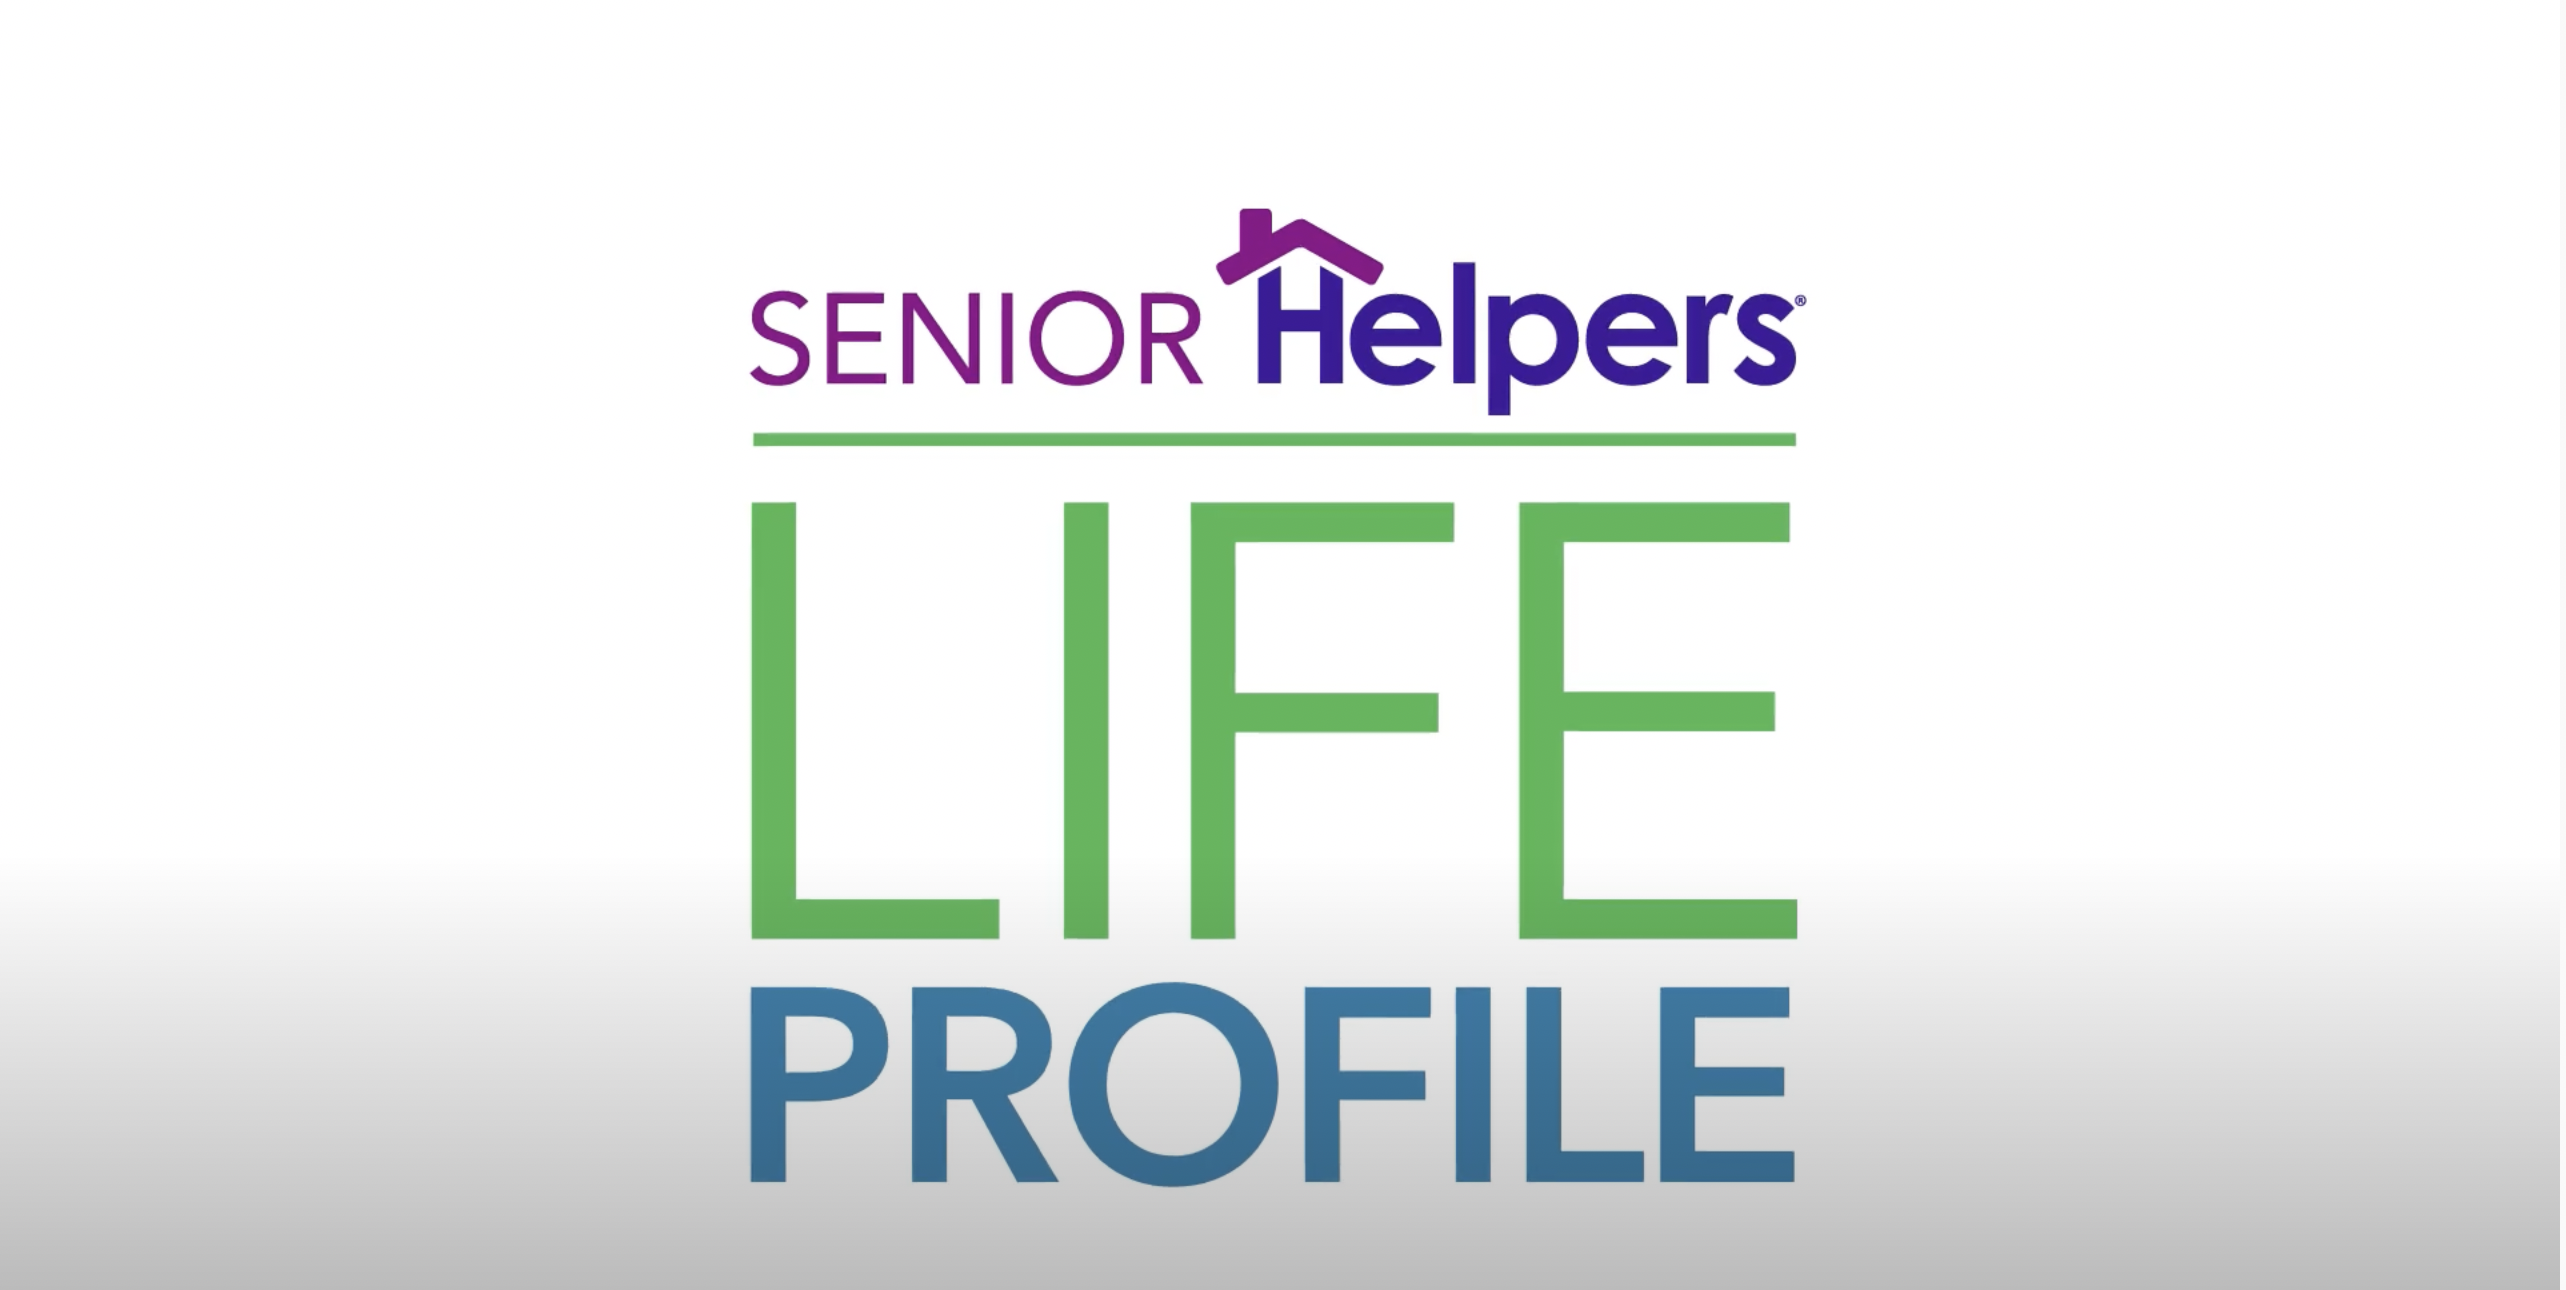 Senior Helpers to open new location in Warrenton Towne Centre, Business